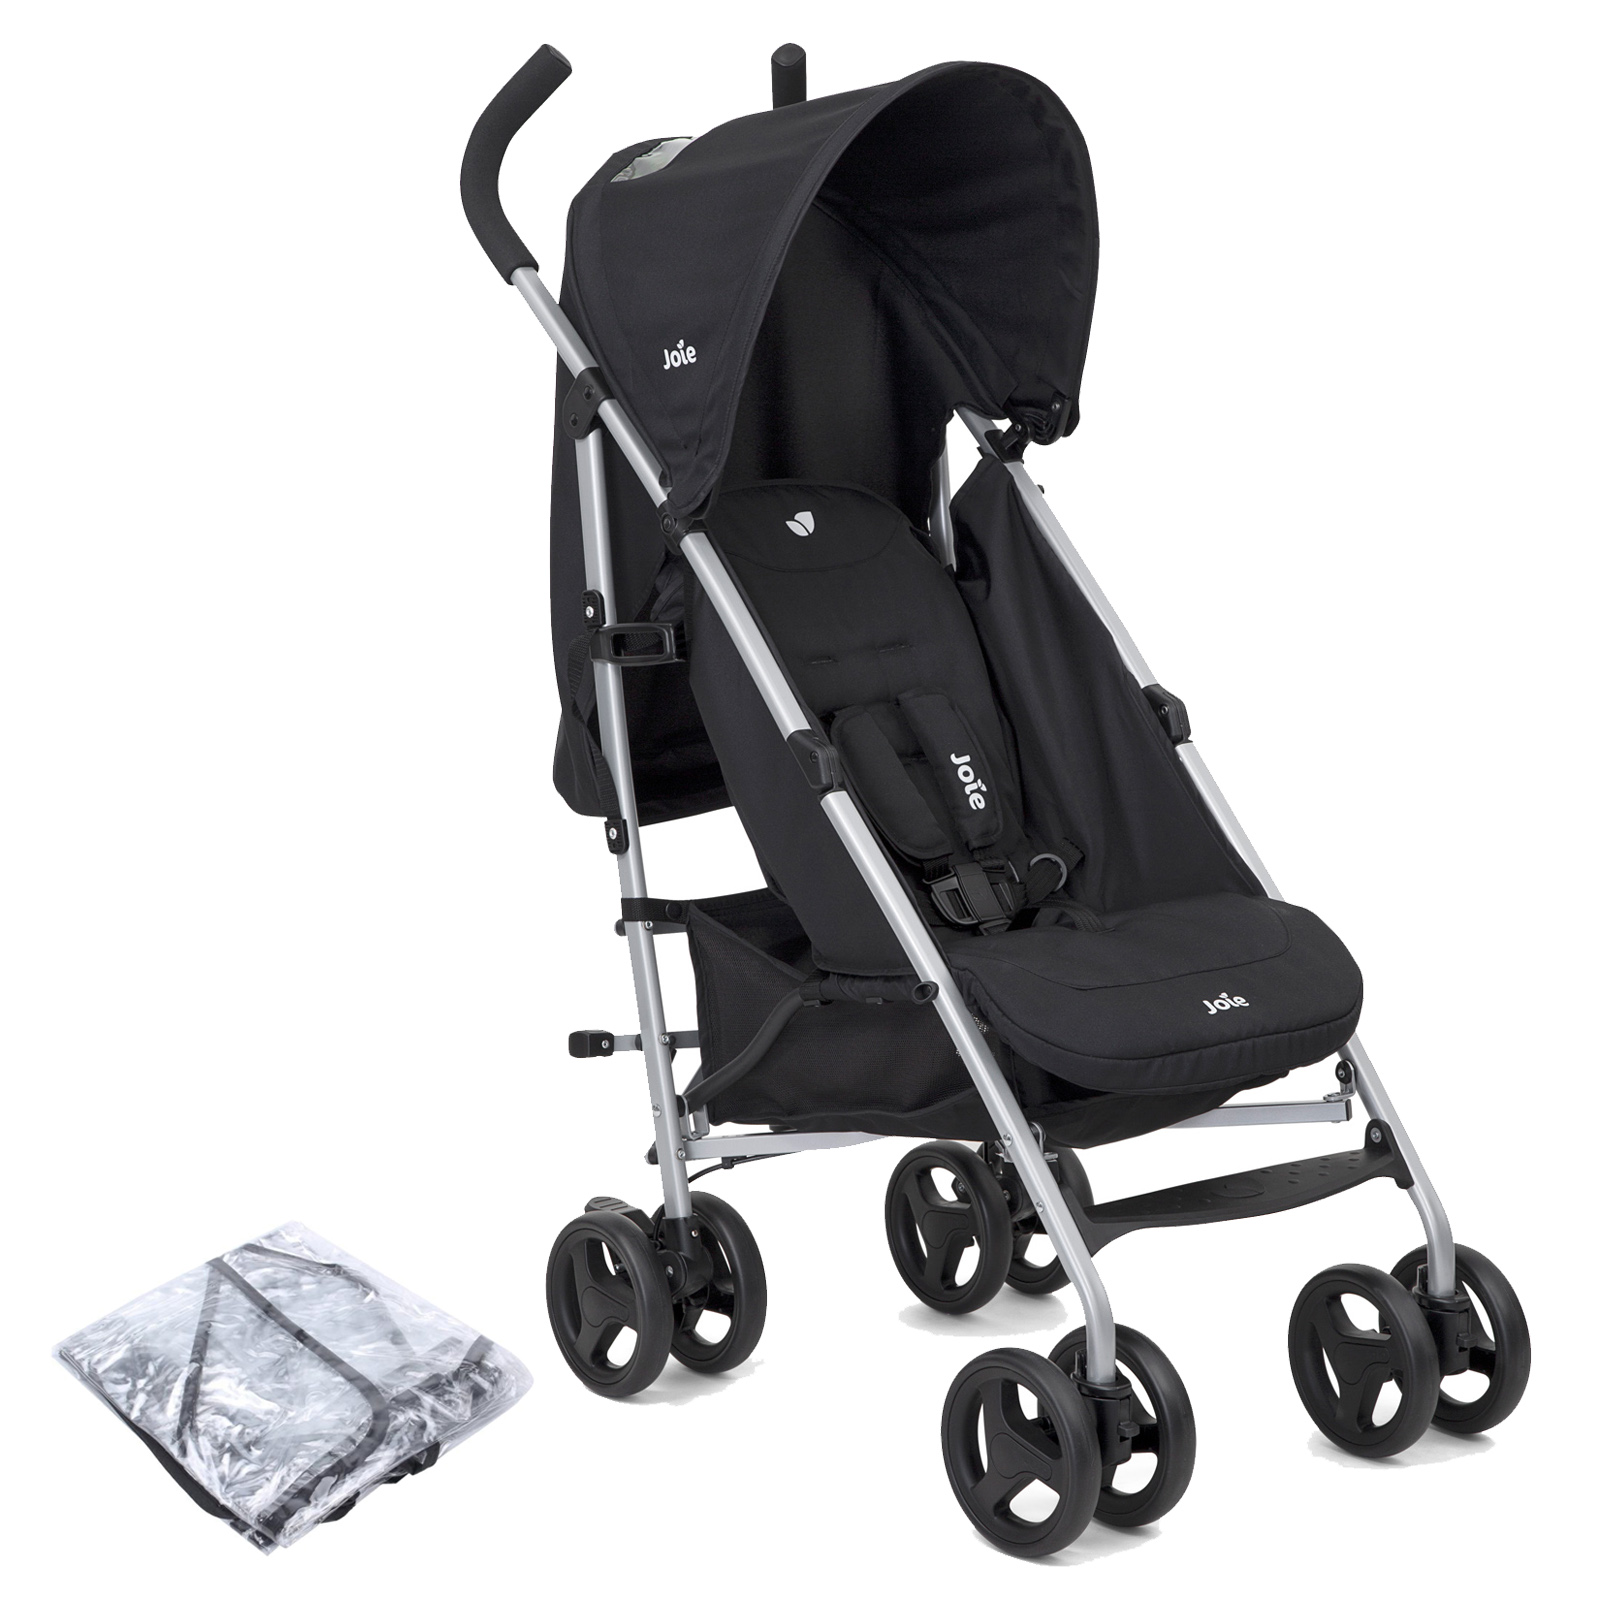 Joie Nitro Pushchair Stroller with Raincover - Coal...